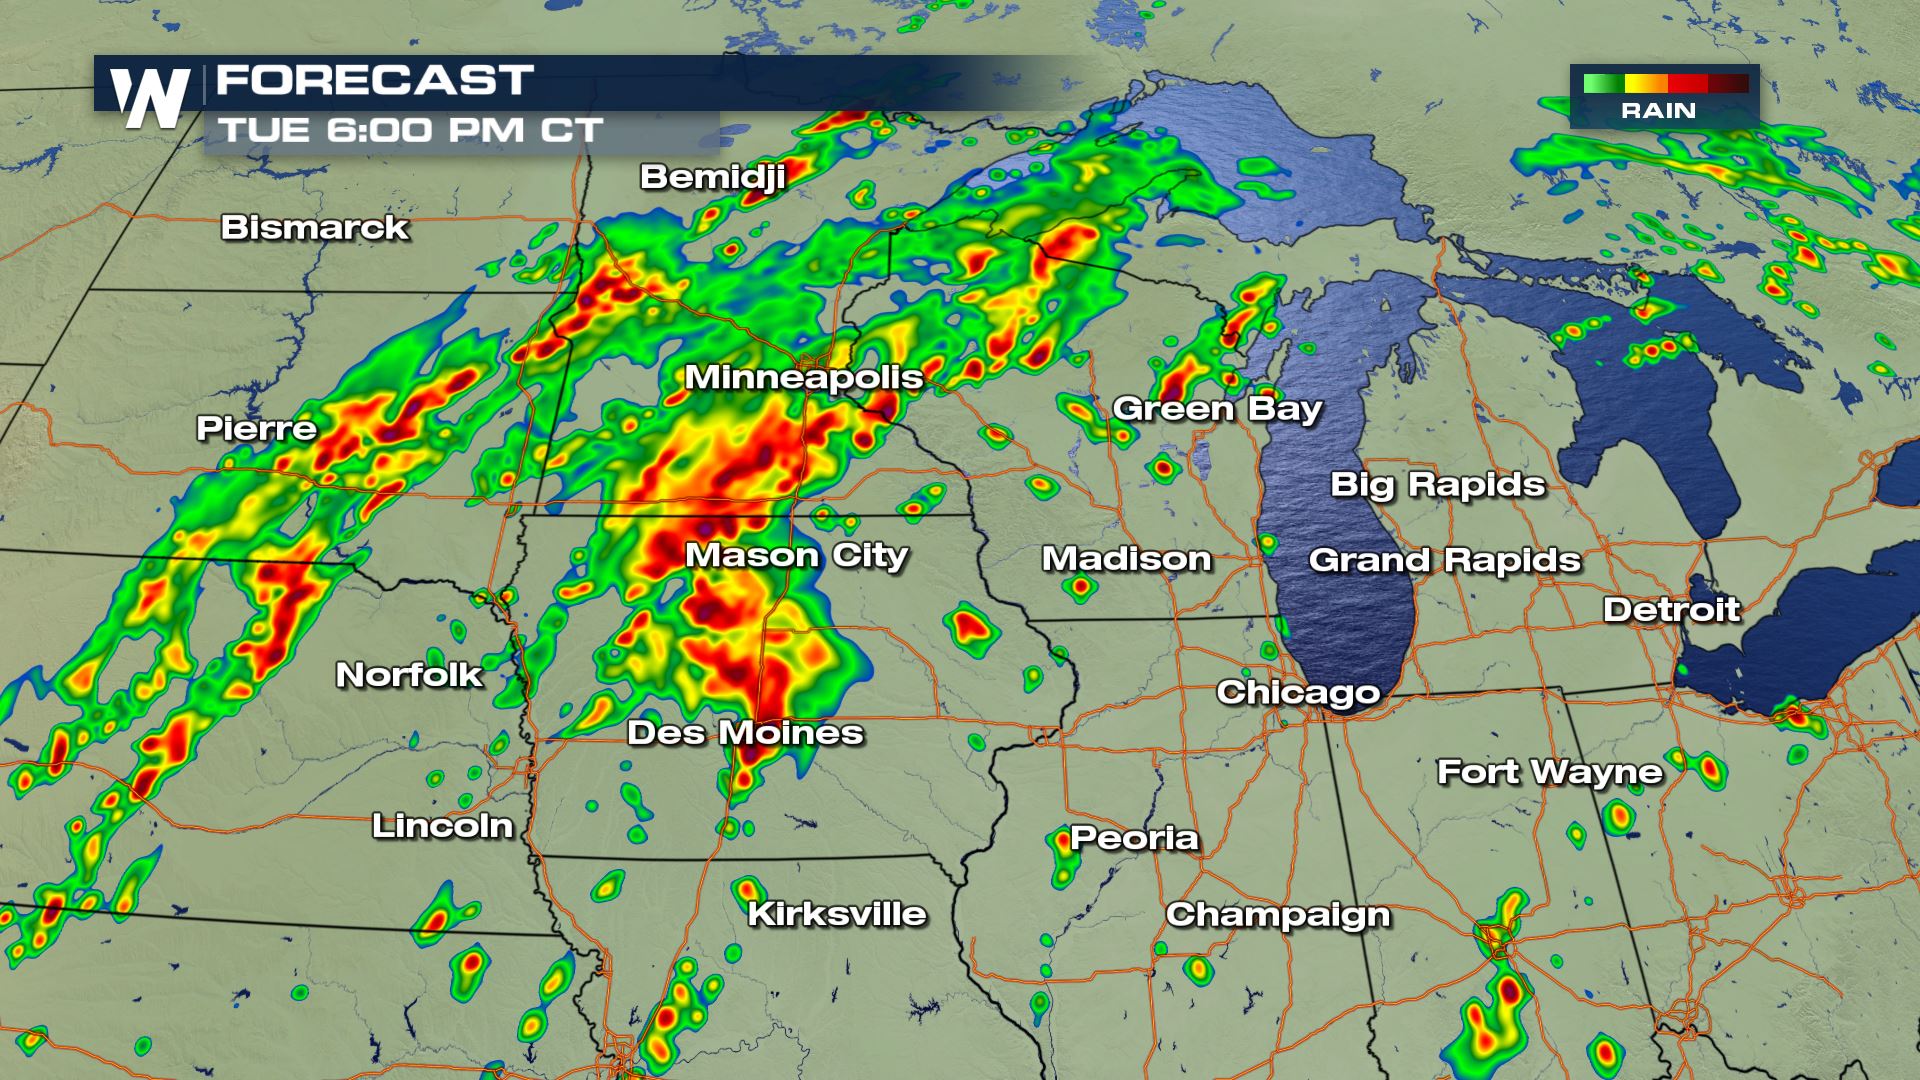 Tornadoes and Damaging Winds Possible for the Upper Midwest Tuesday